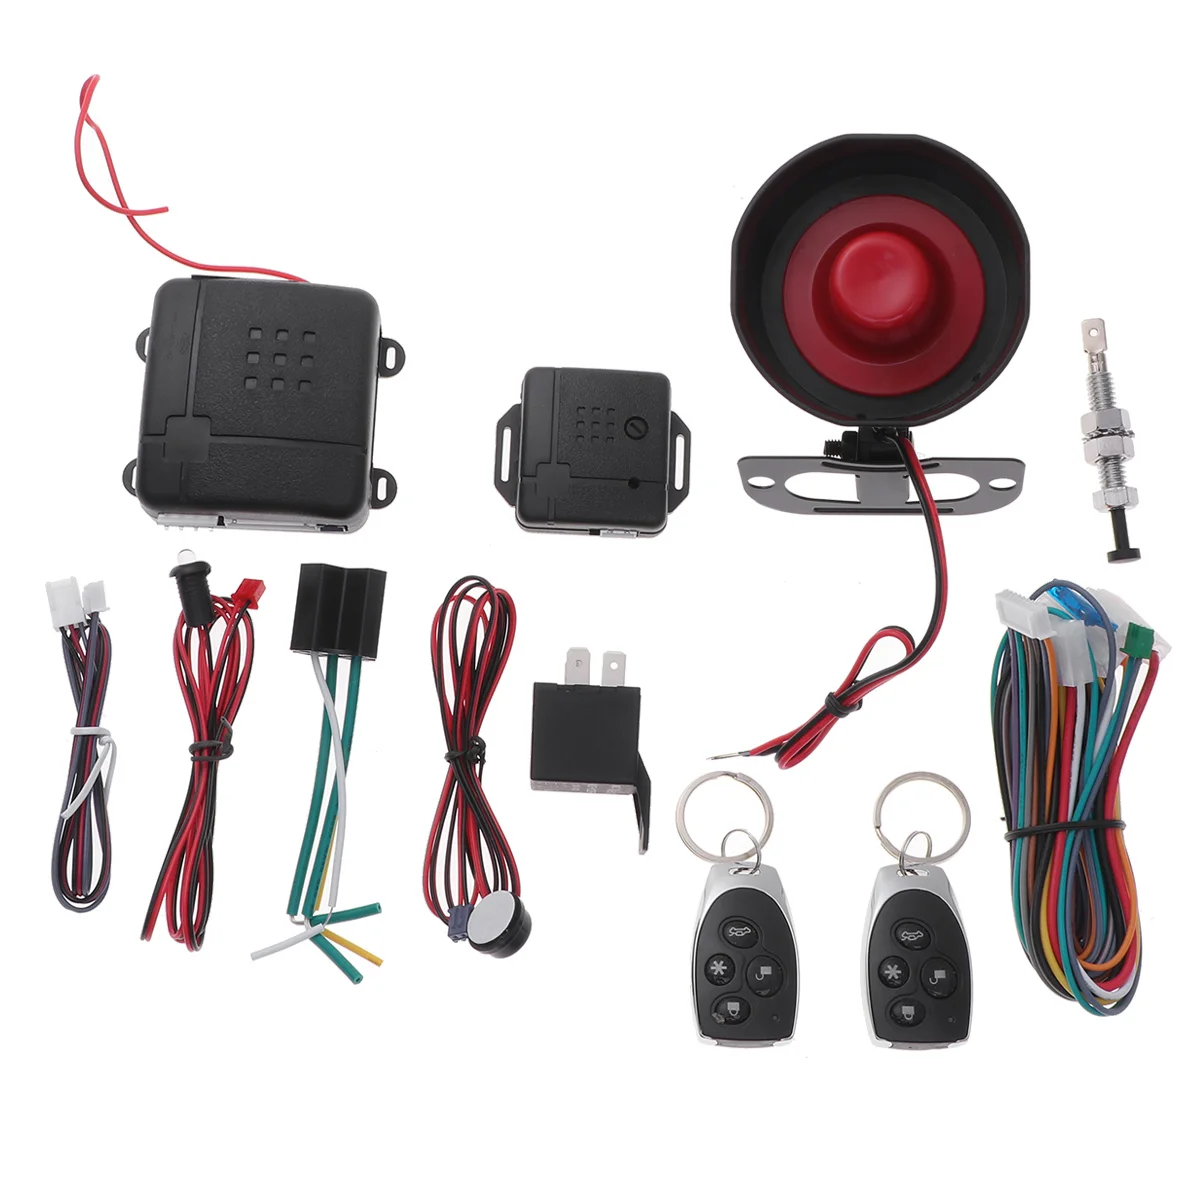 

Car Central Locking Kit Auto Remote Door Lock Keyless Entry System Remote Controllers Car Alarm